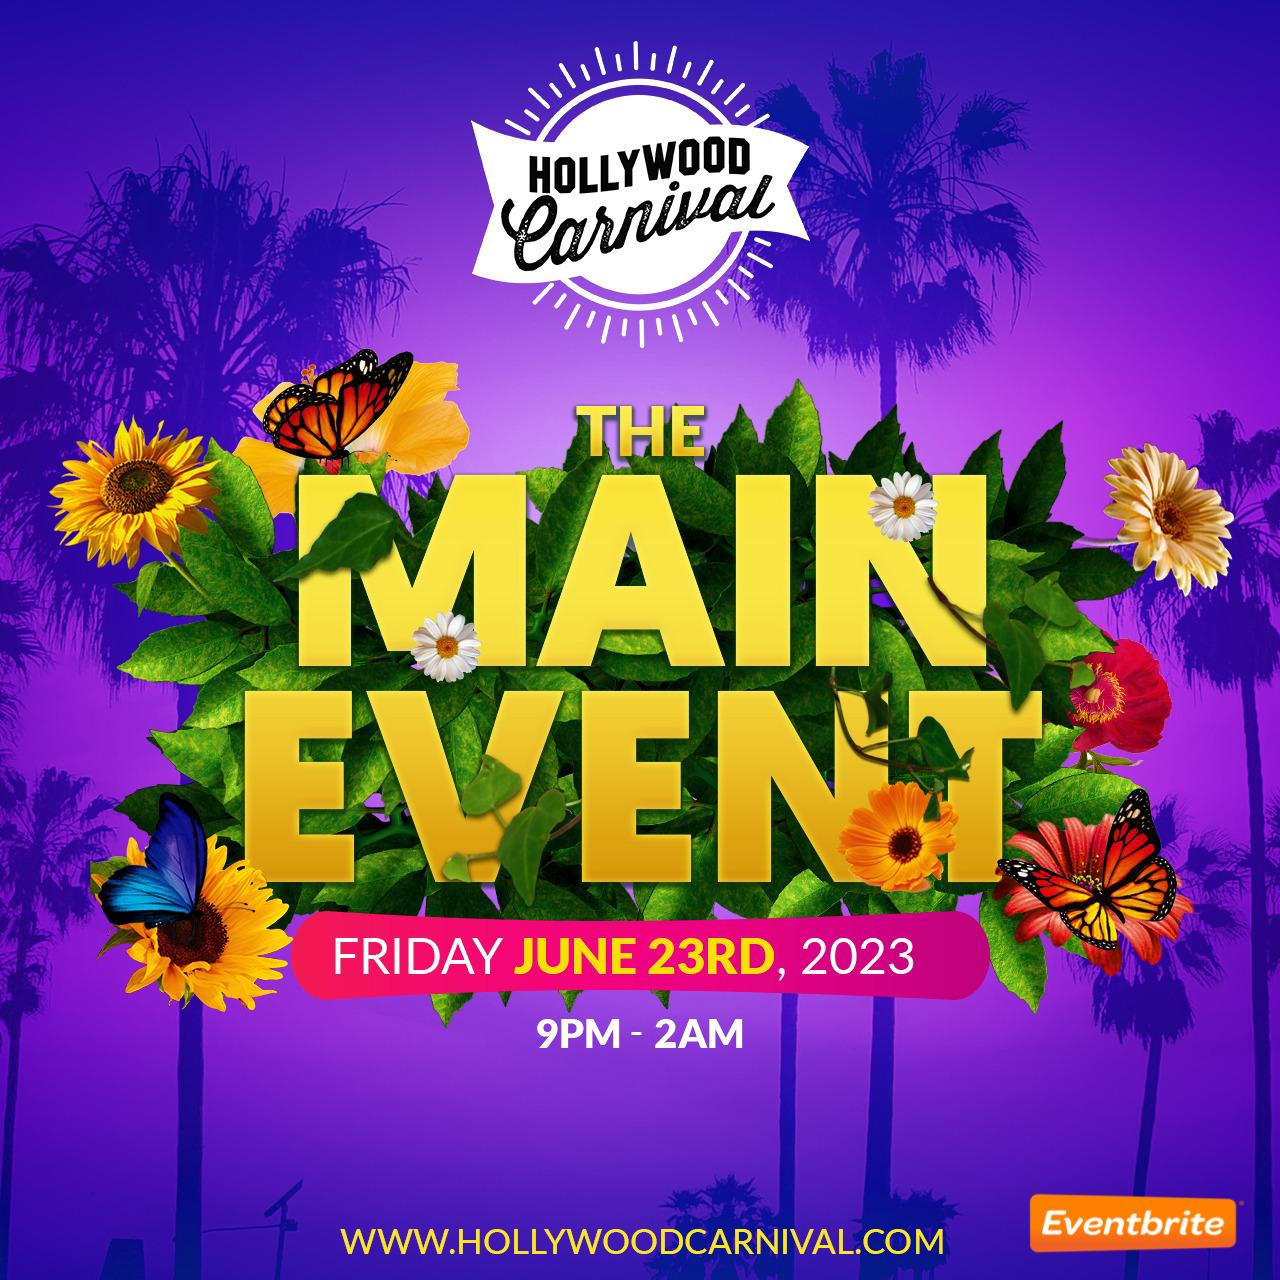 Hollywood Carnival - The Main Event